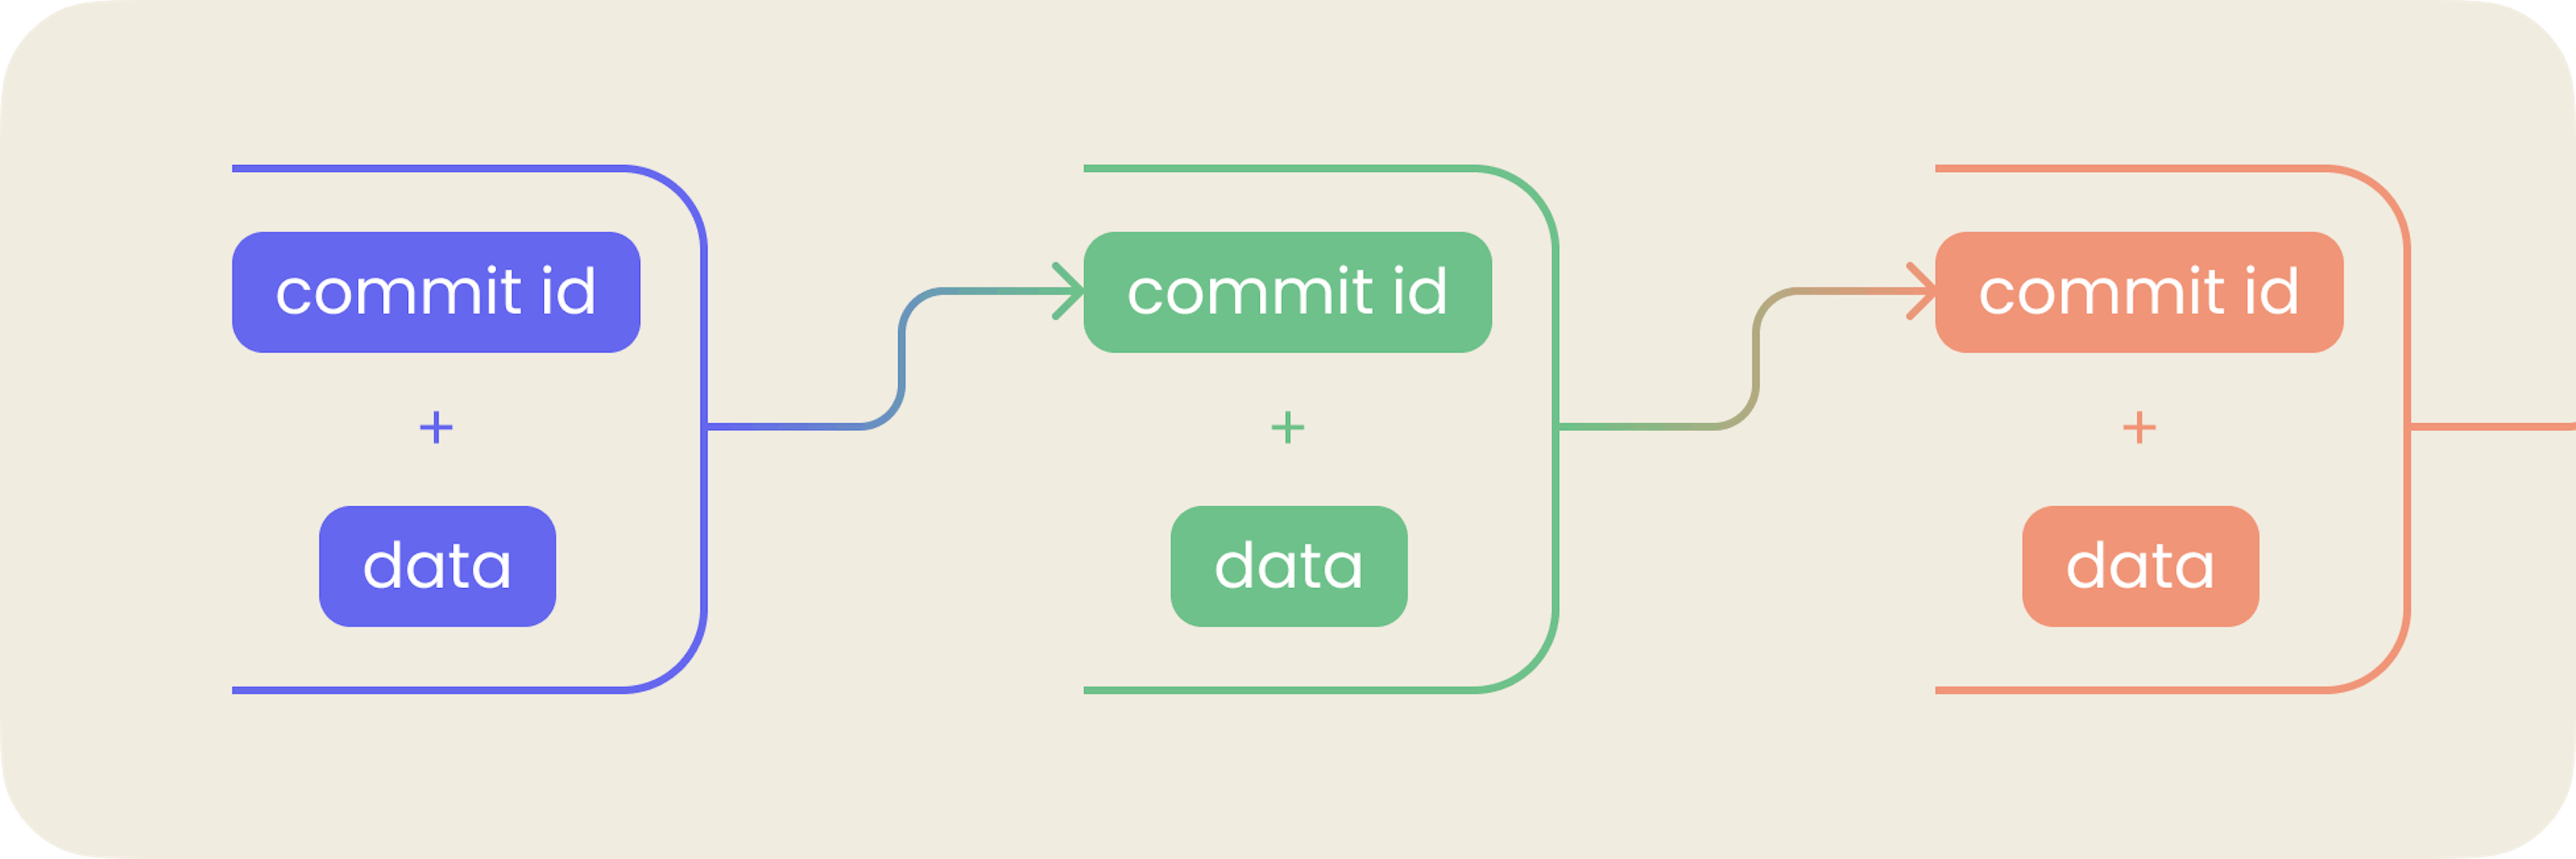 Identifiers make commits into a chain where each new commit is tightly connected to the previous one